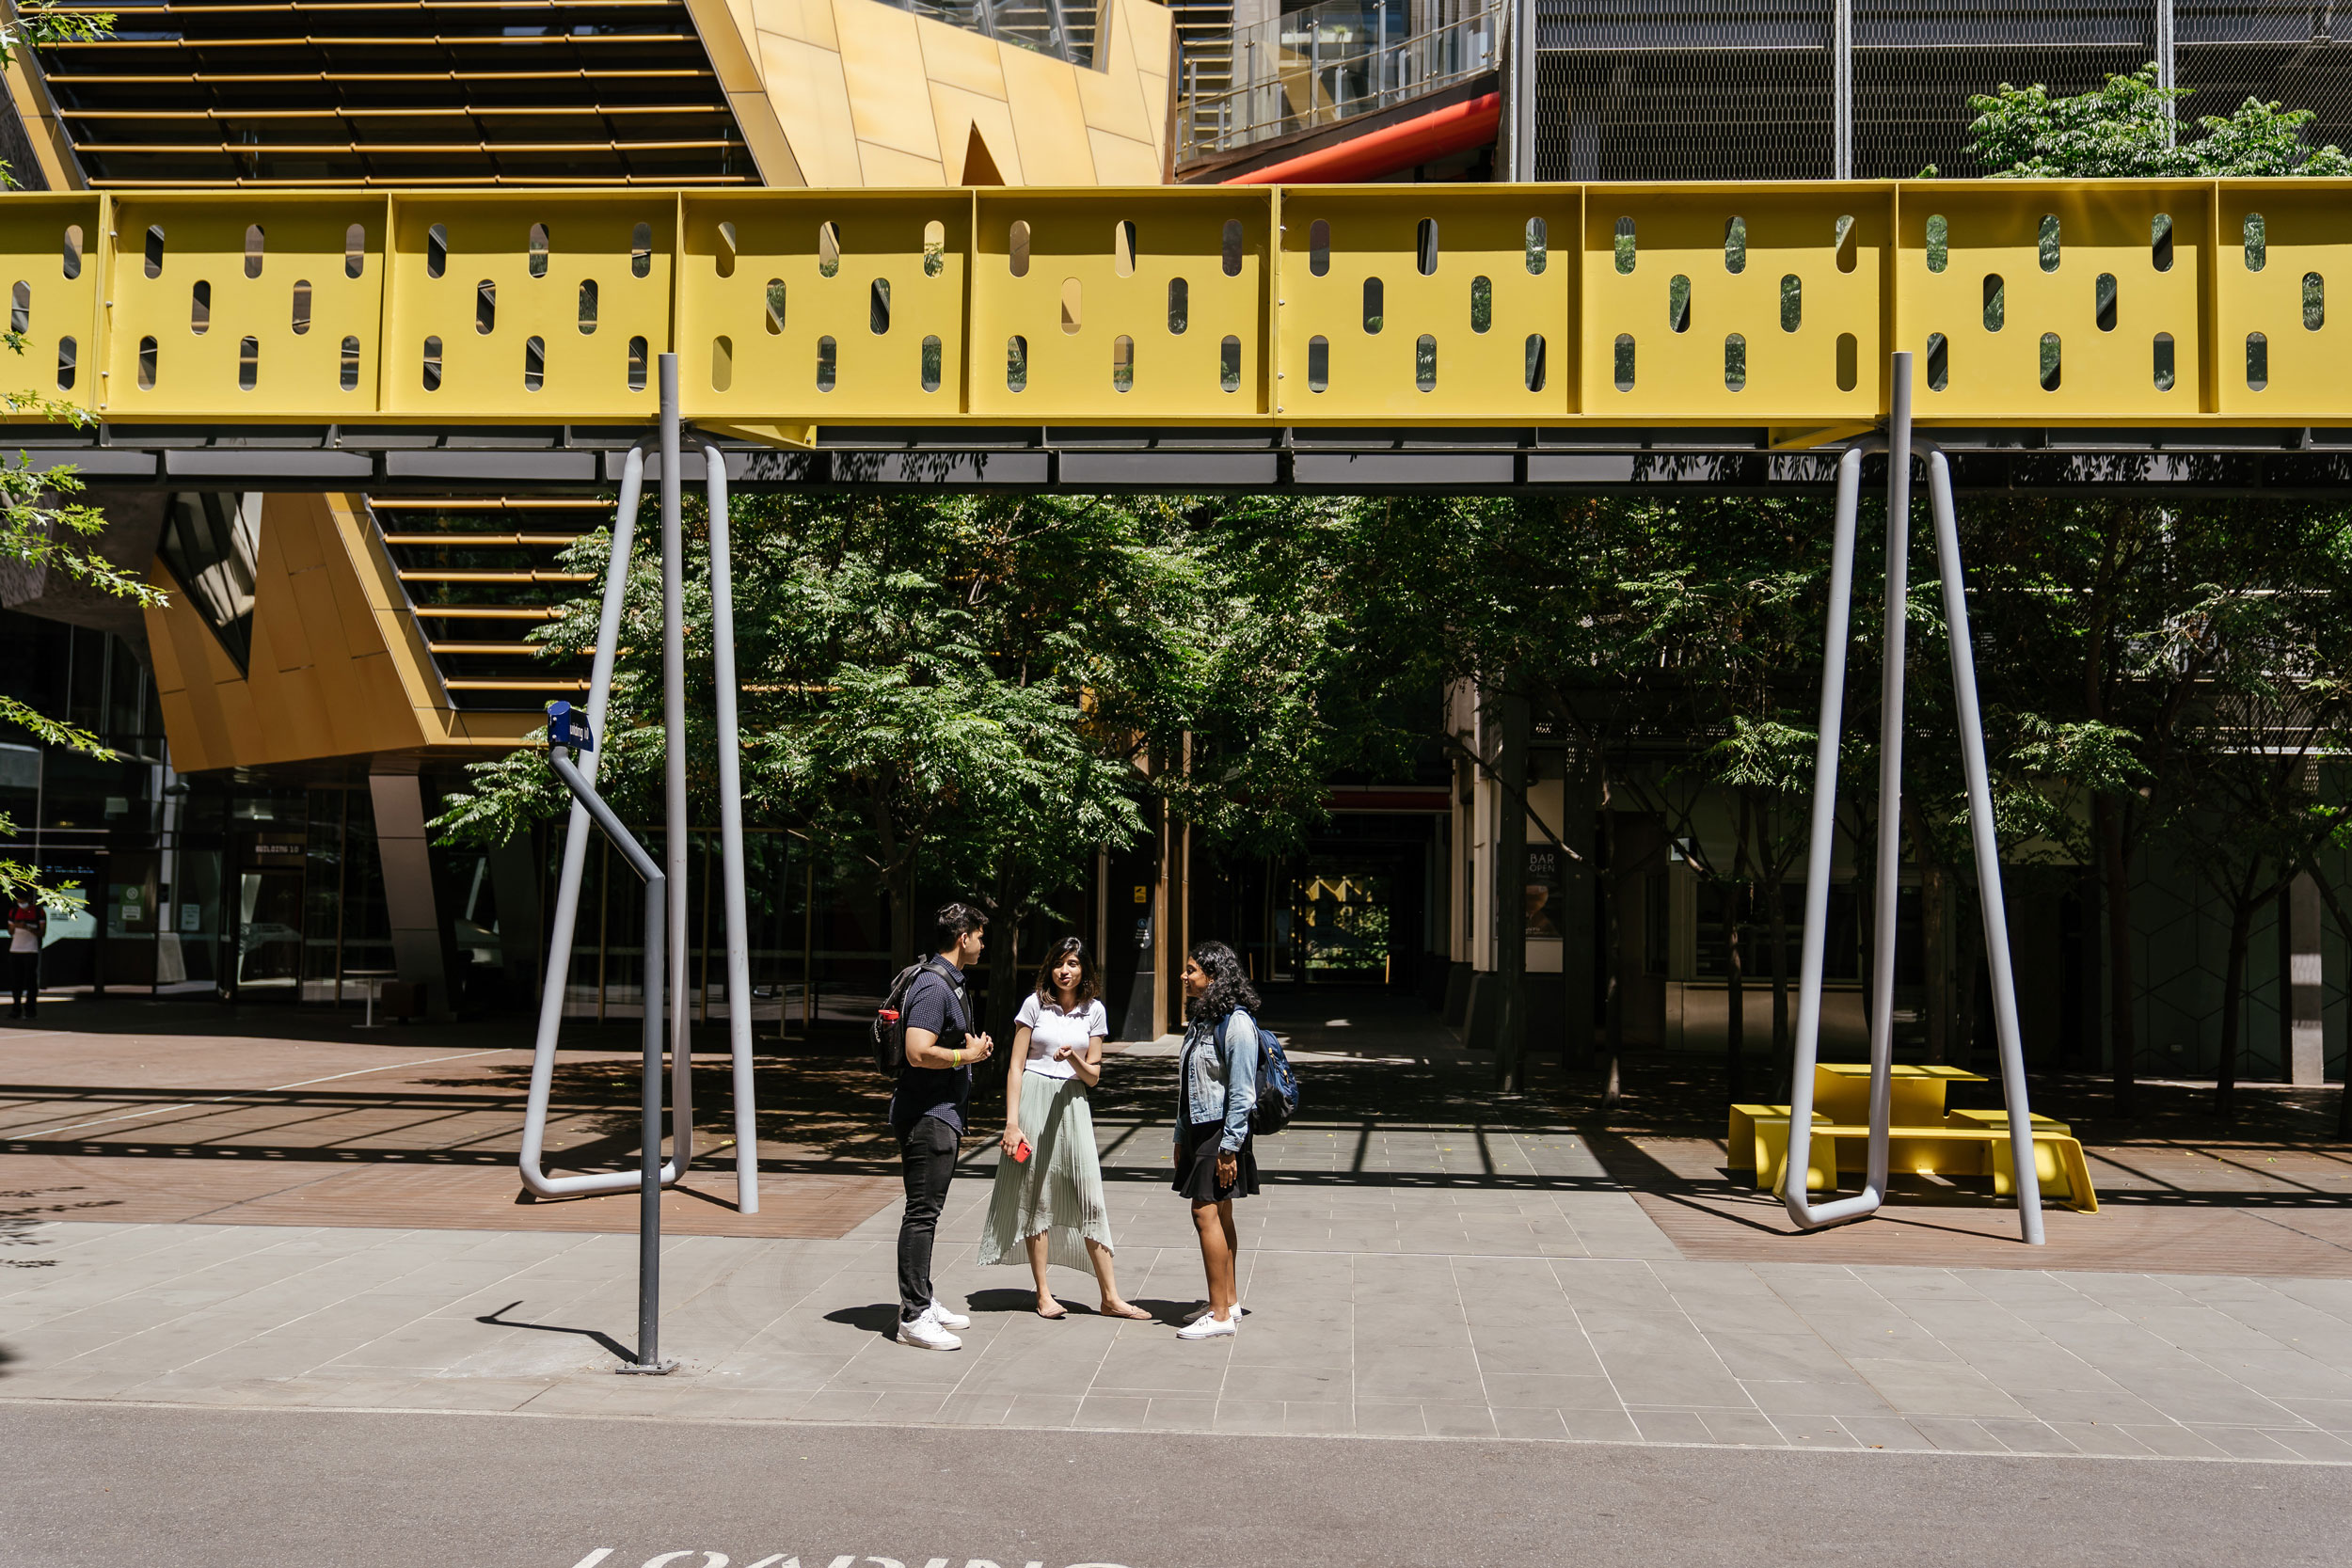 A group of three students standing beneath a yellow architectural structure.